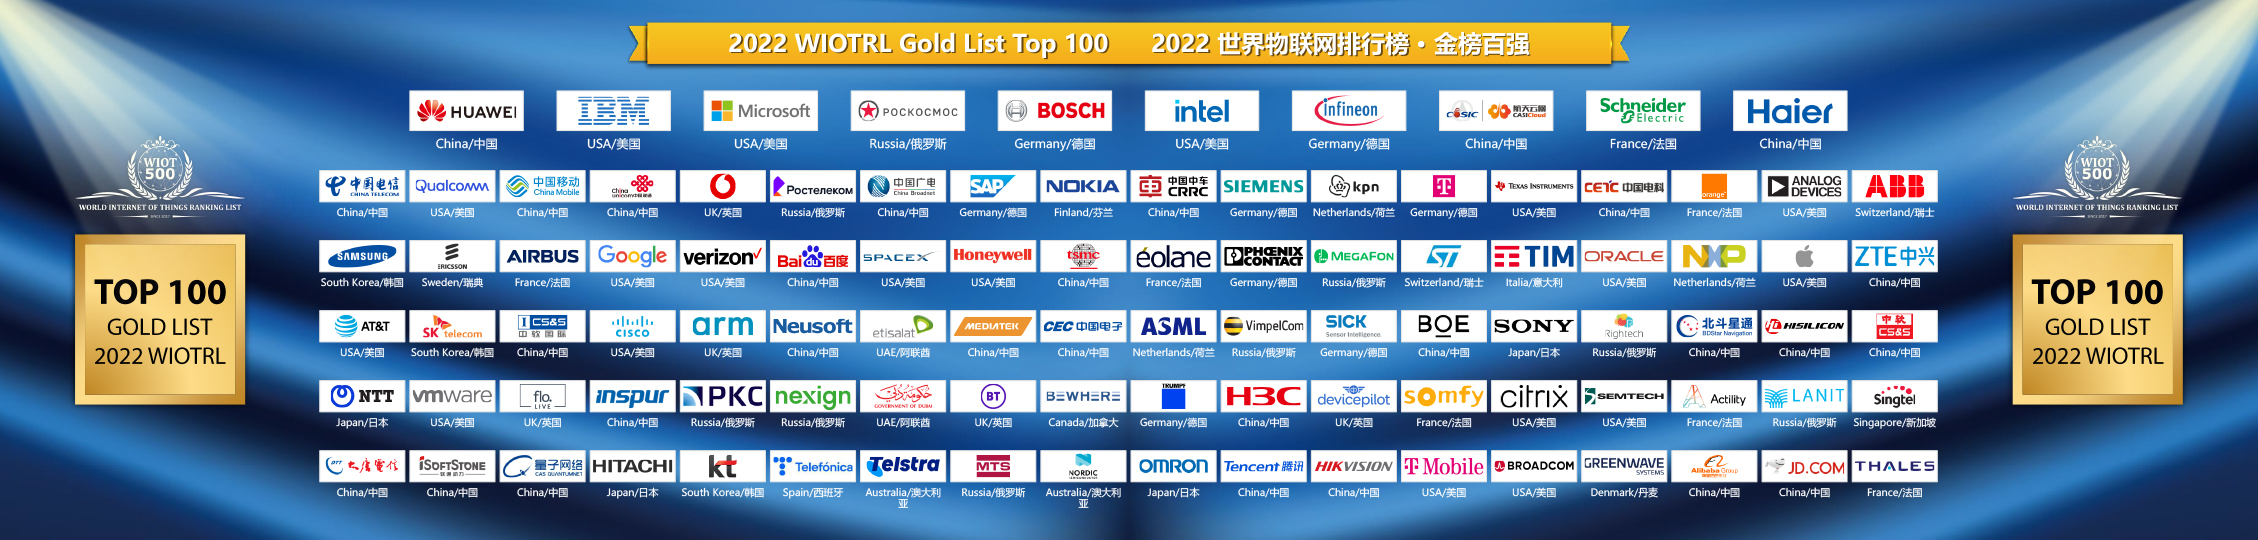 2022 World IoT Ranking List Top 500 Released-Gold List Top 100